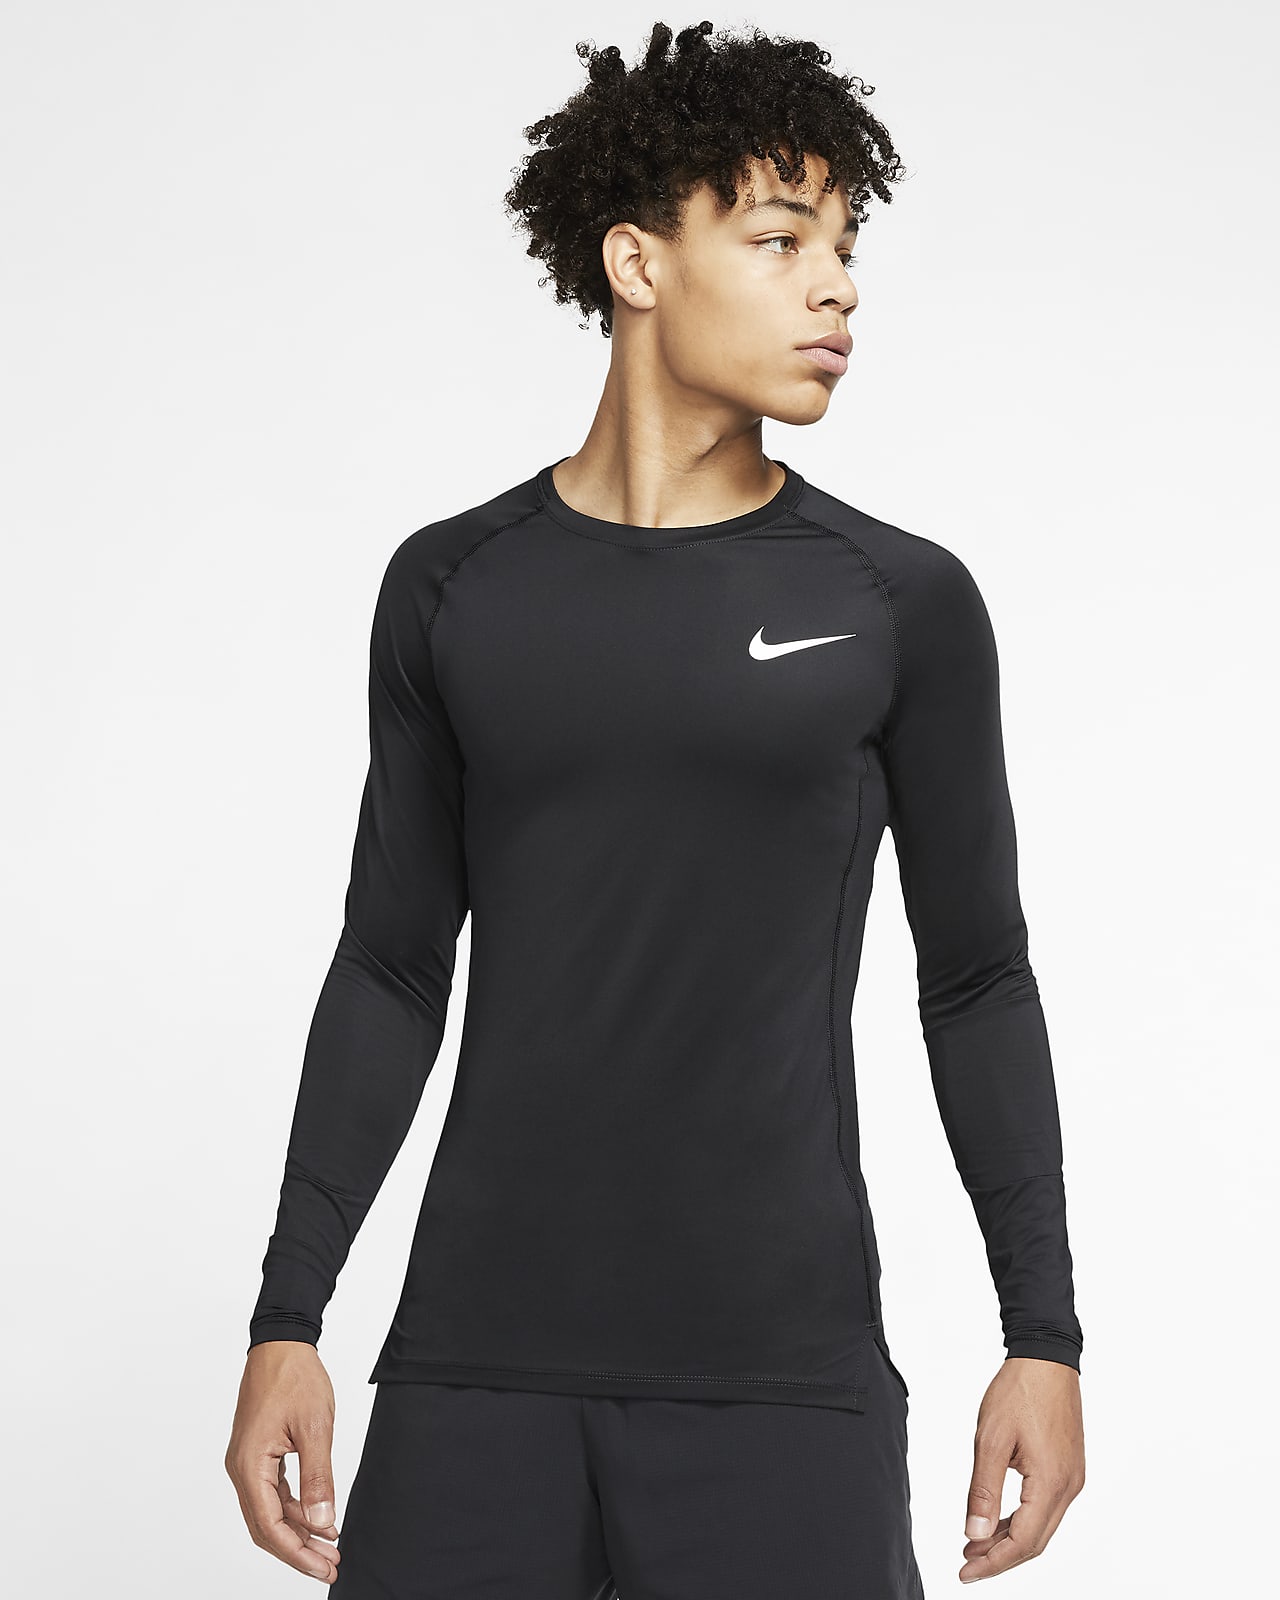 Wet Many dangerous situations Shed Nike Top Long Sleeve Online, SAVE 54% - aveclumiere.com